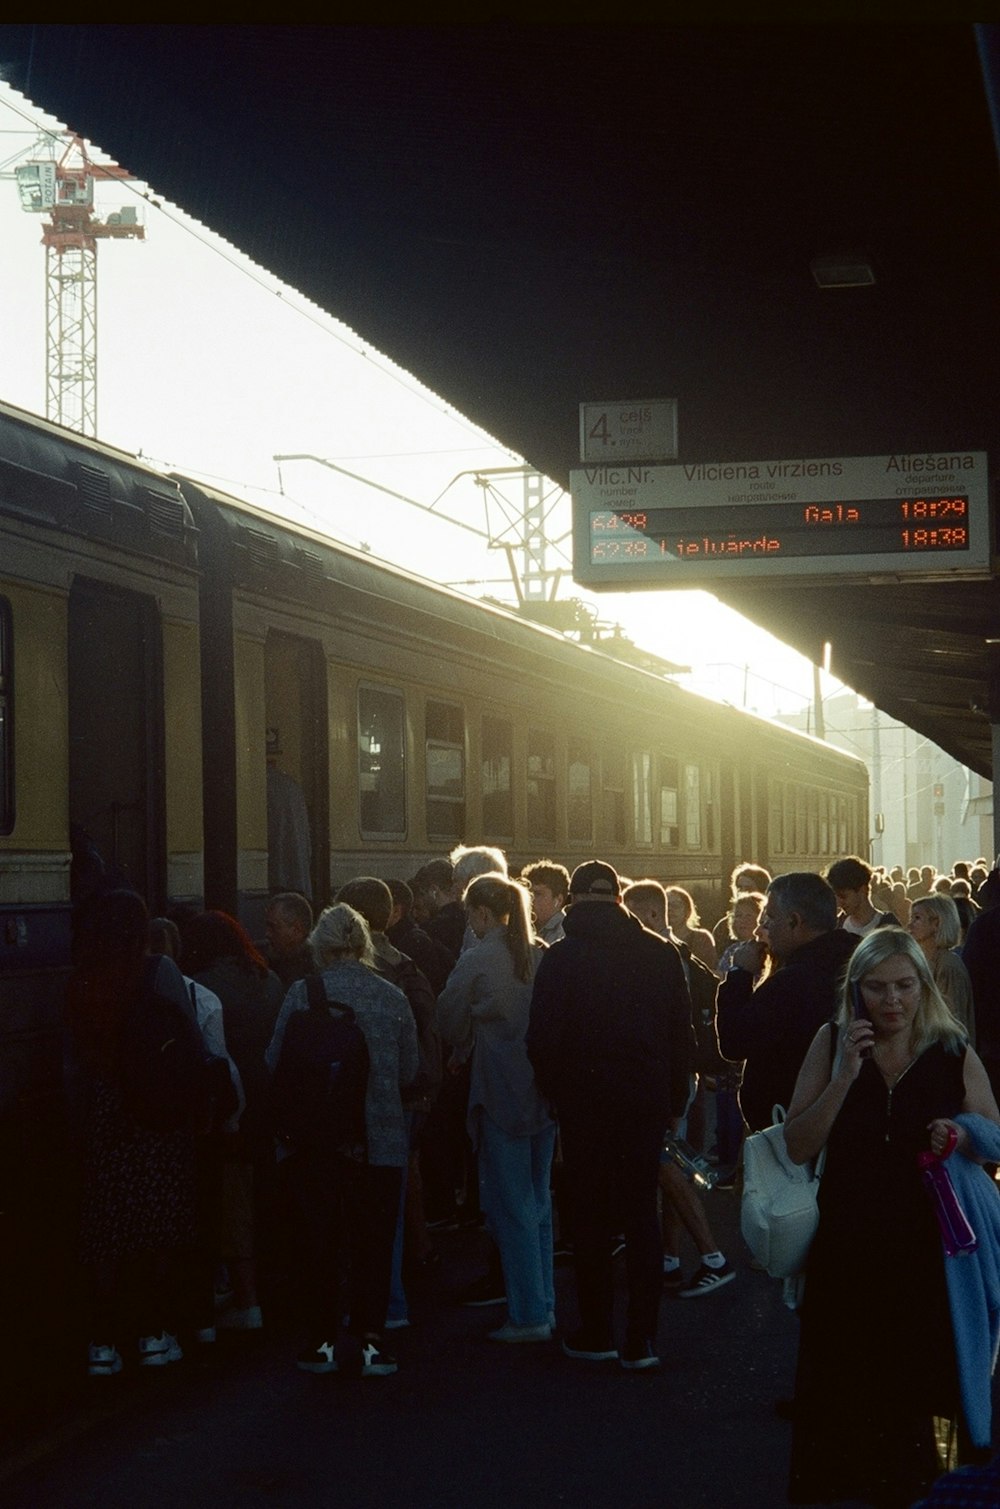 a crowd of people standing next to a train